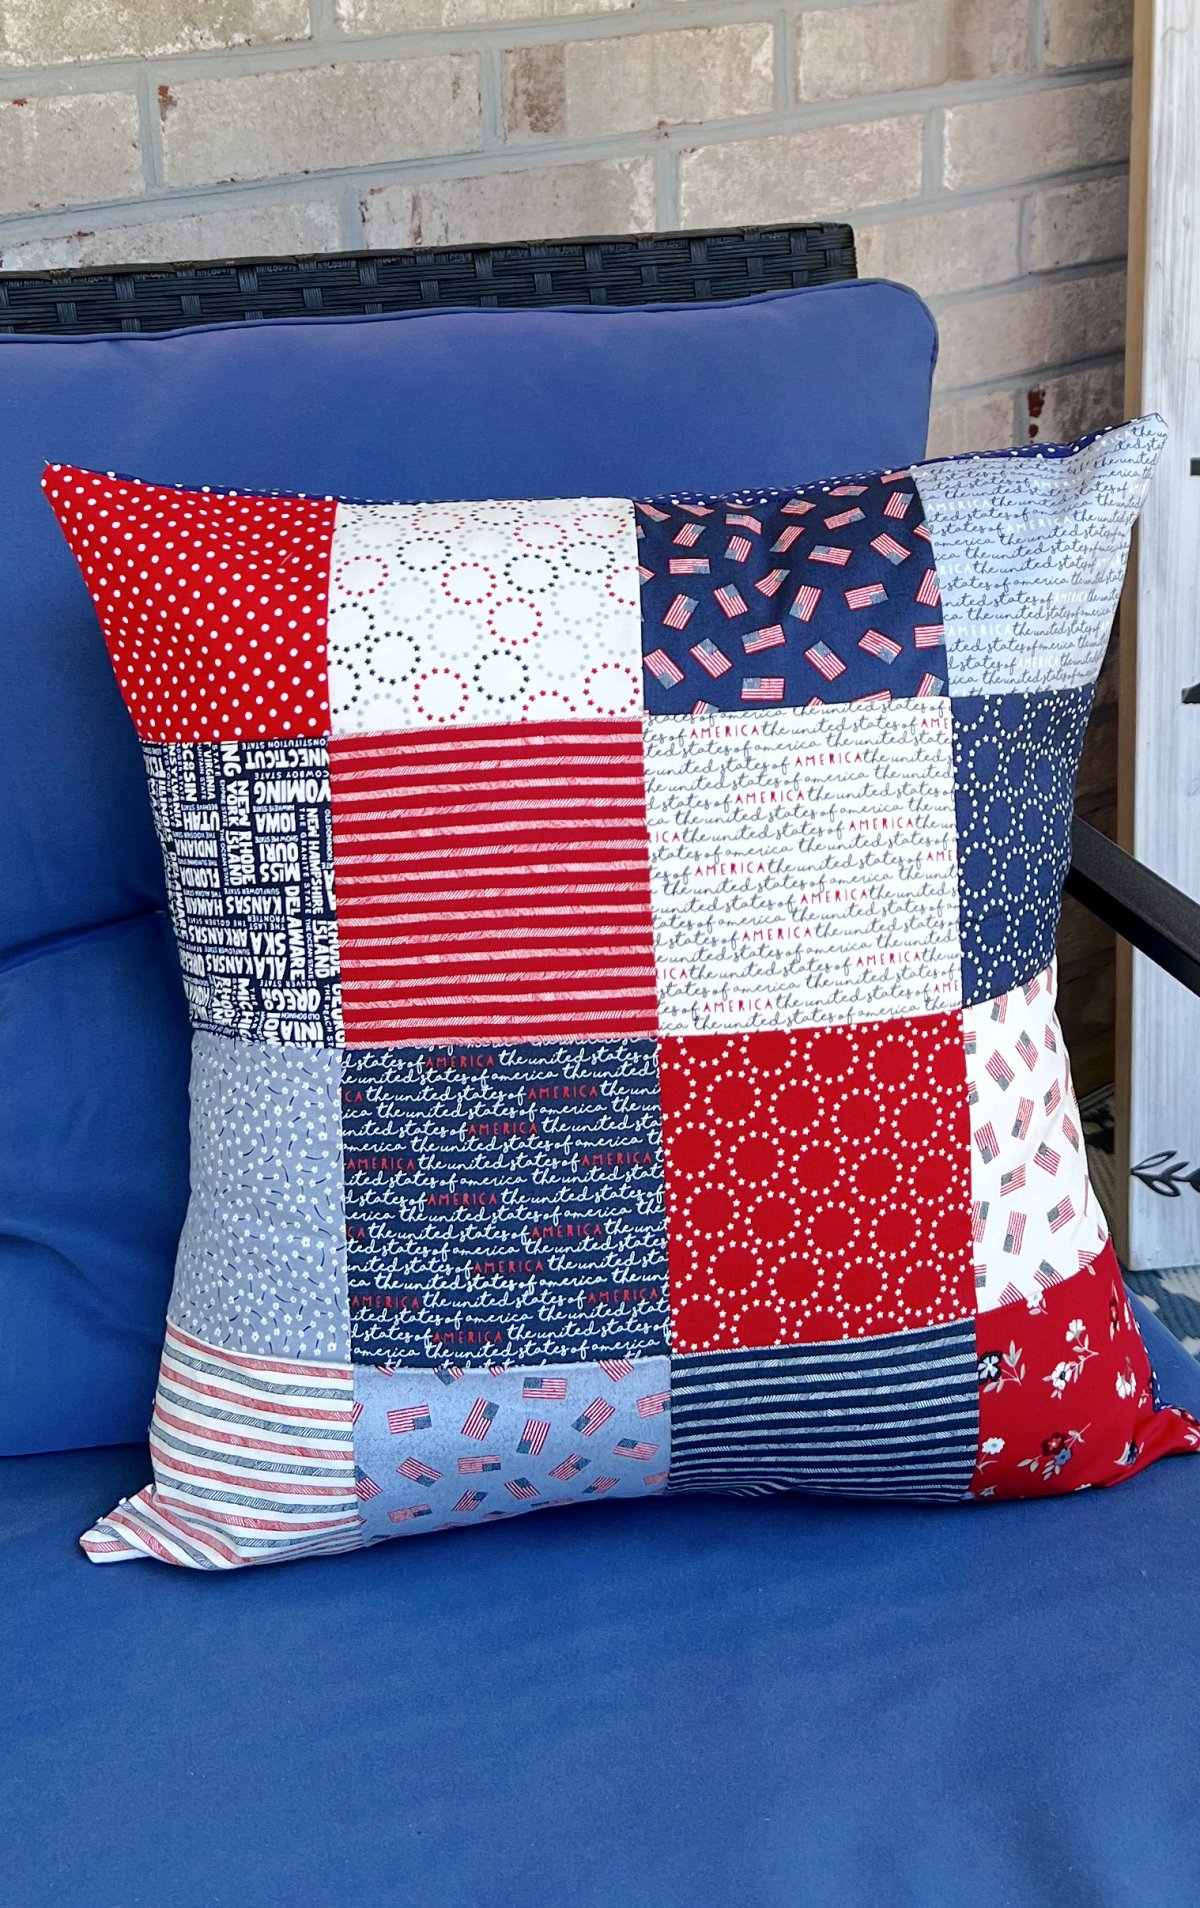 Image contains a square patchwork pillow made of red, white, and blue fabric sitting on a blue outdoor chair.